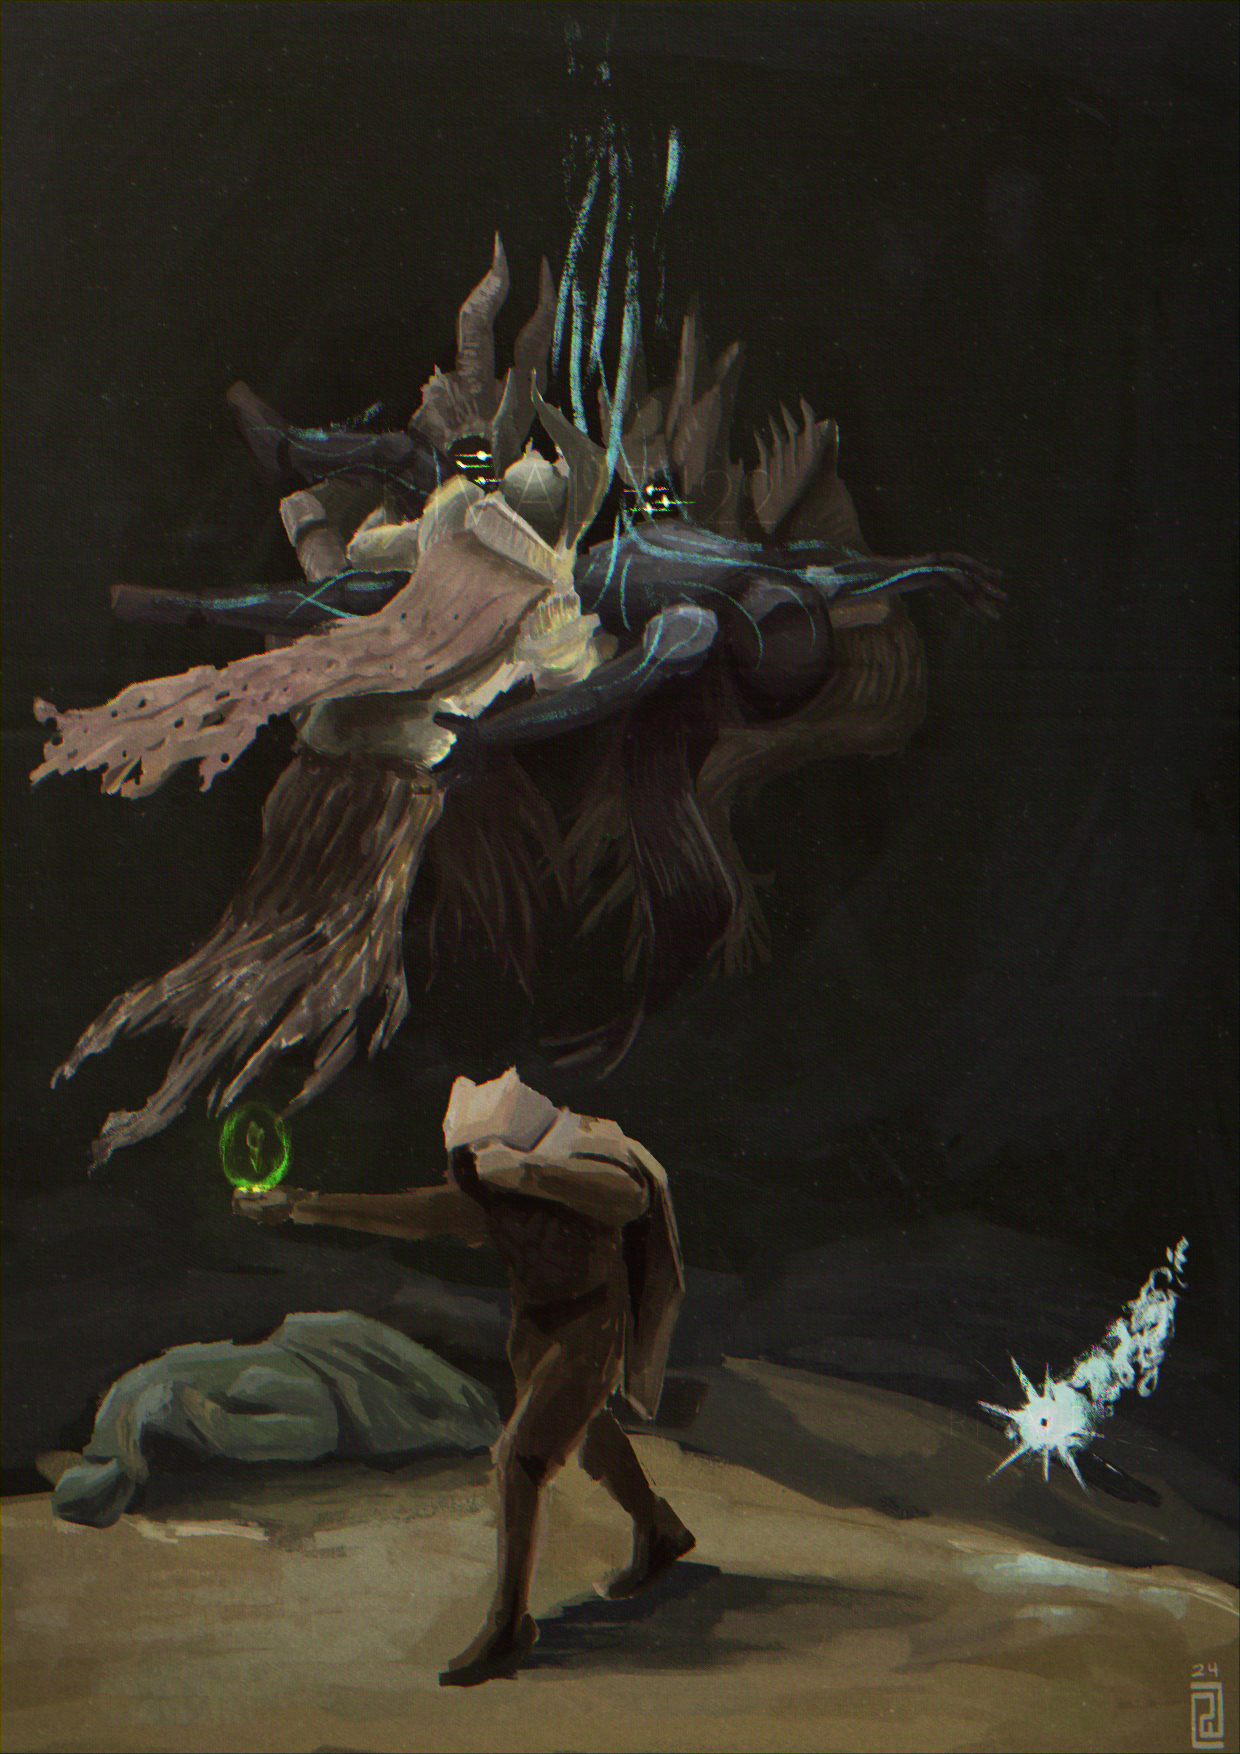 The Transfiguration of Omar Agah. After Francisco Goya's "Witches' Flight" (1798) Contribution to D2 Art Events' Spring Media 2024 event. Destiny © Bungie